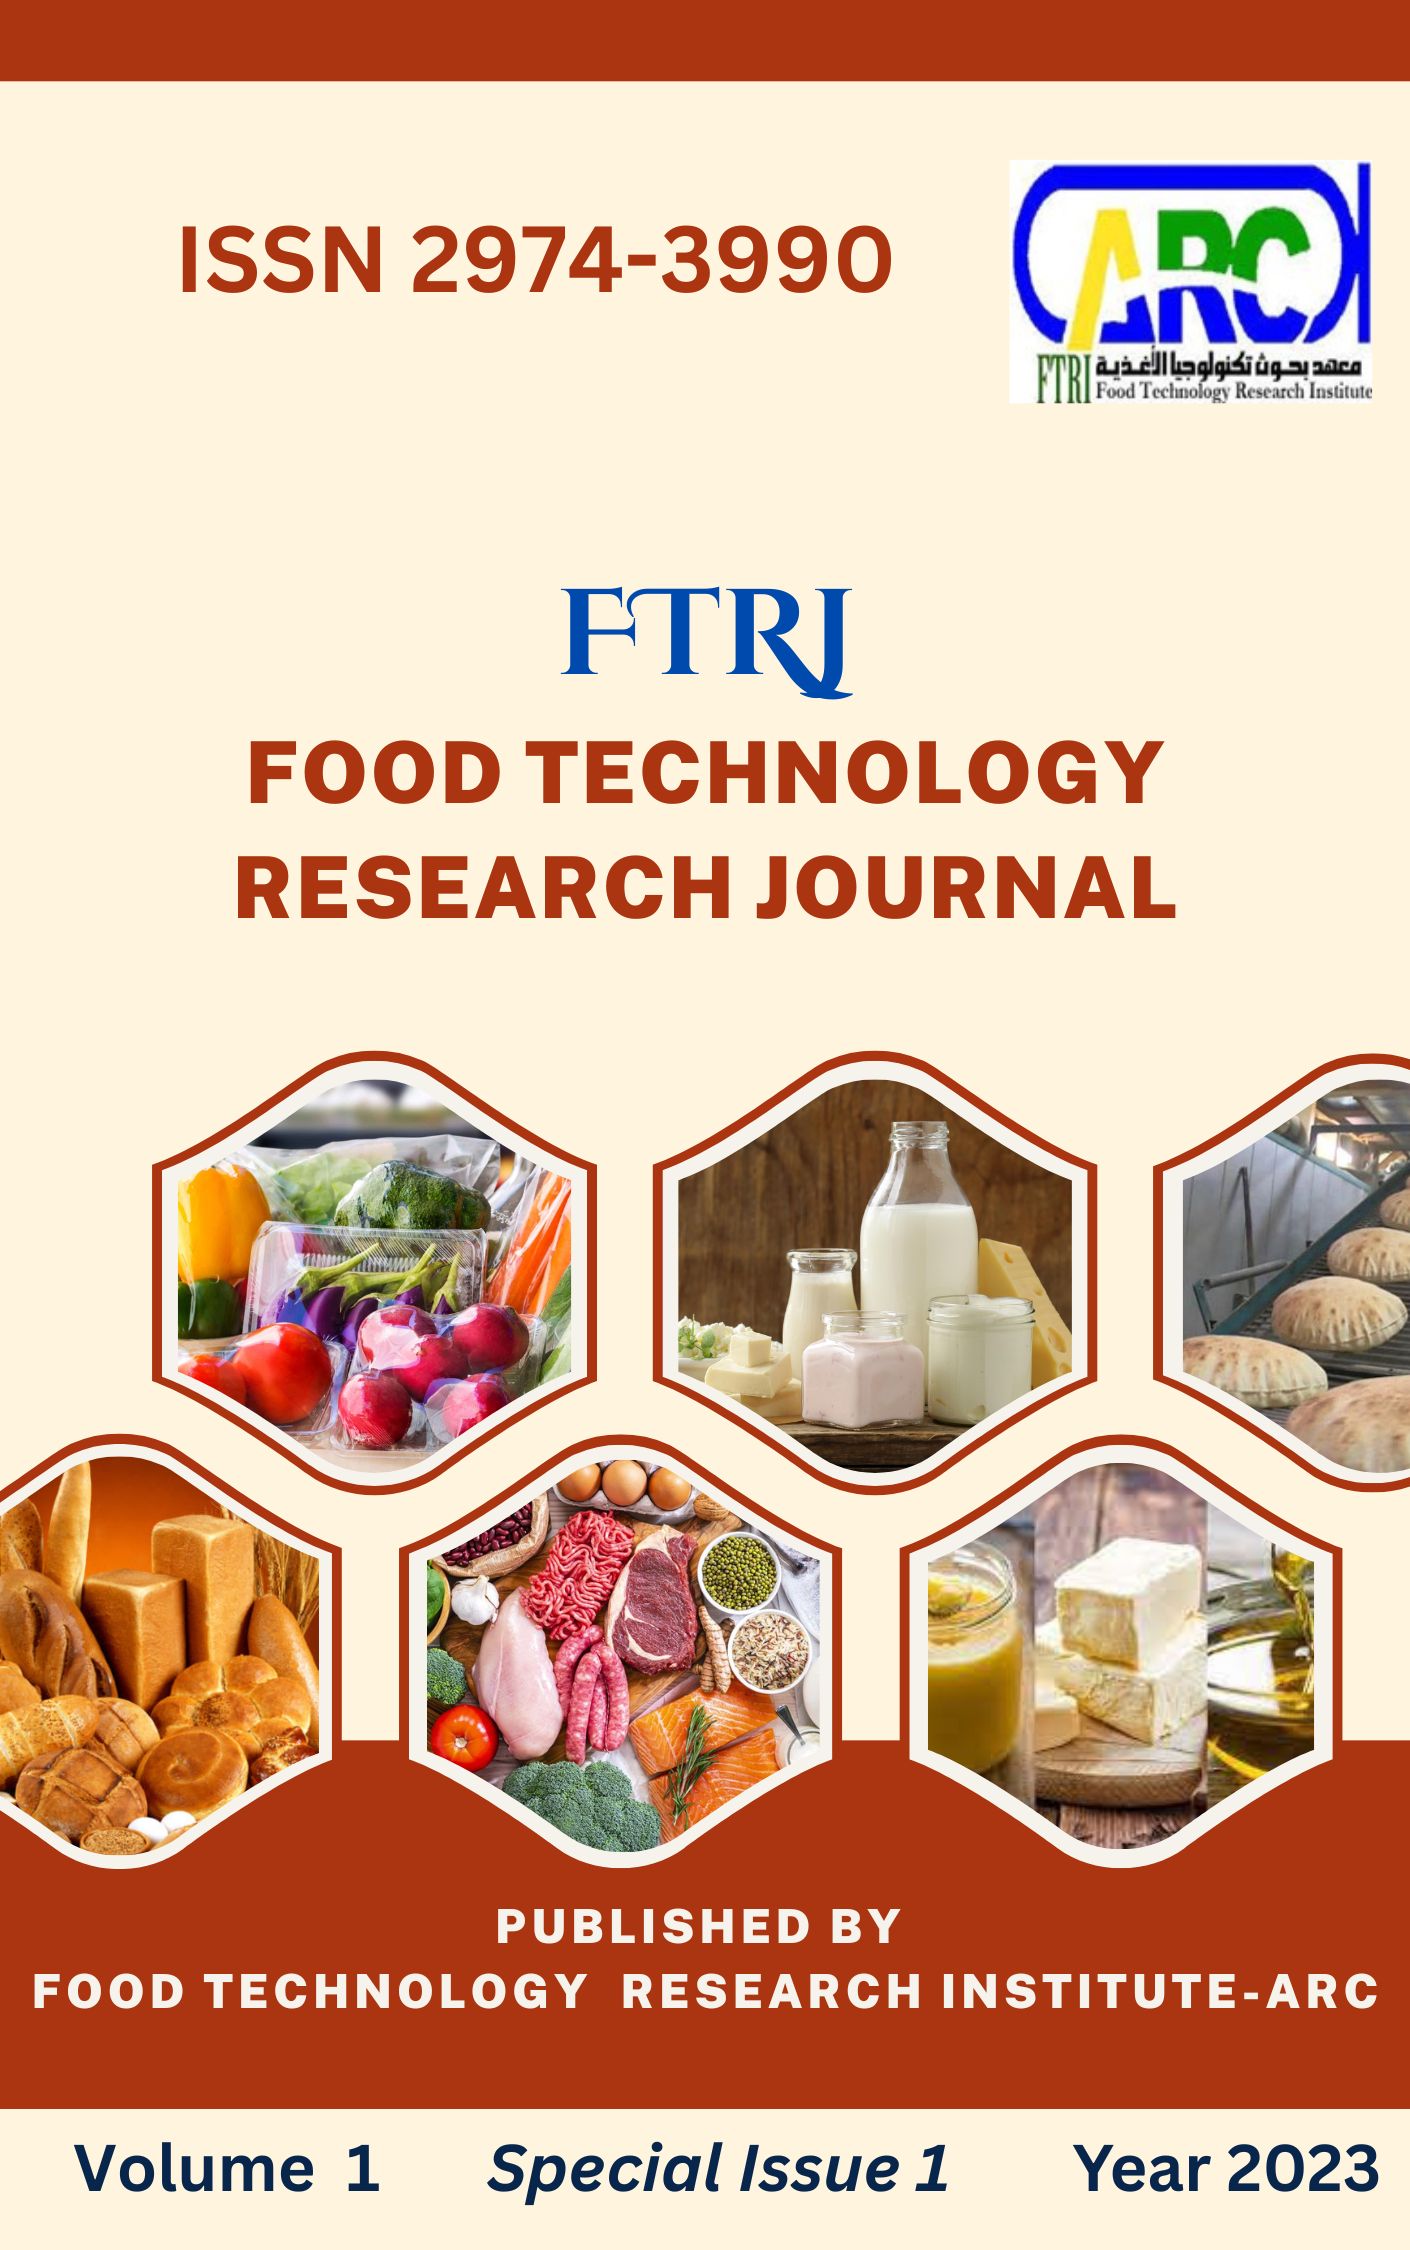 Food Technology Research Journal